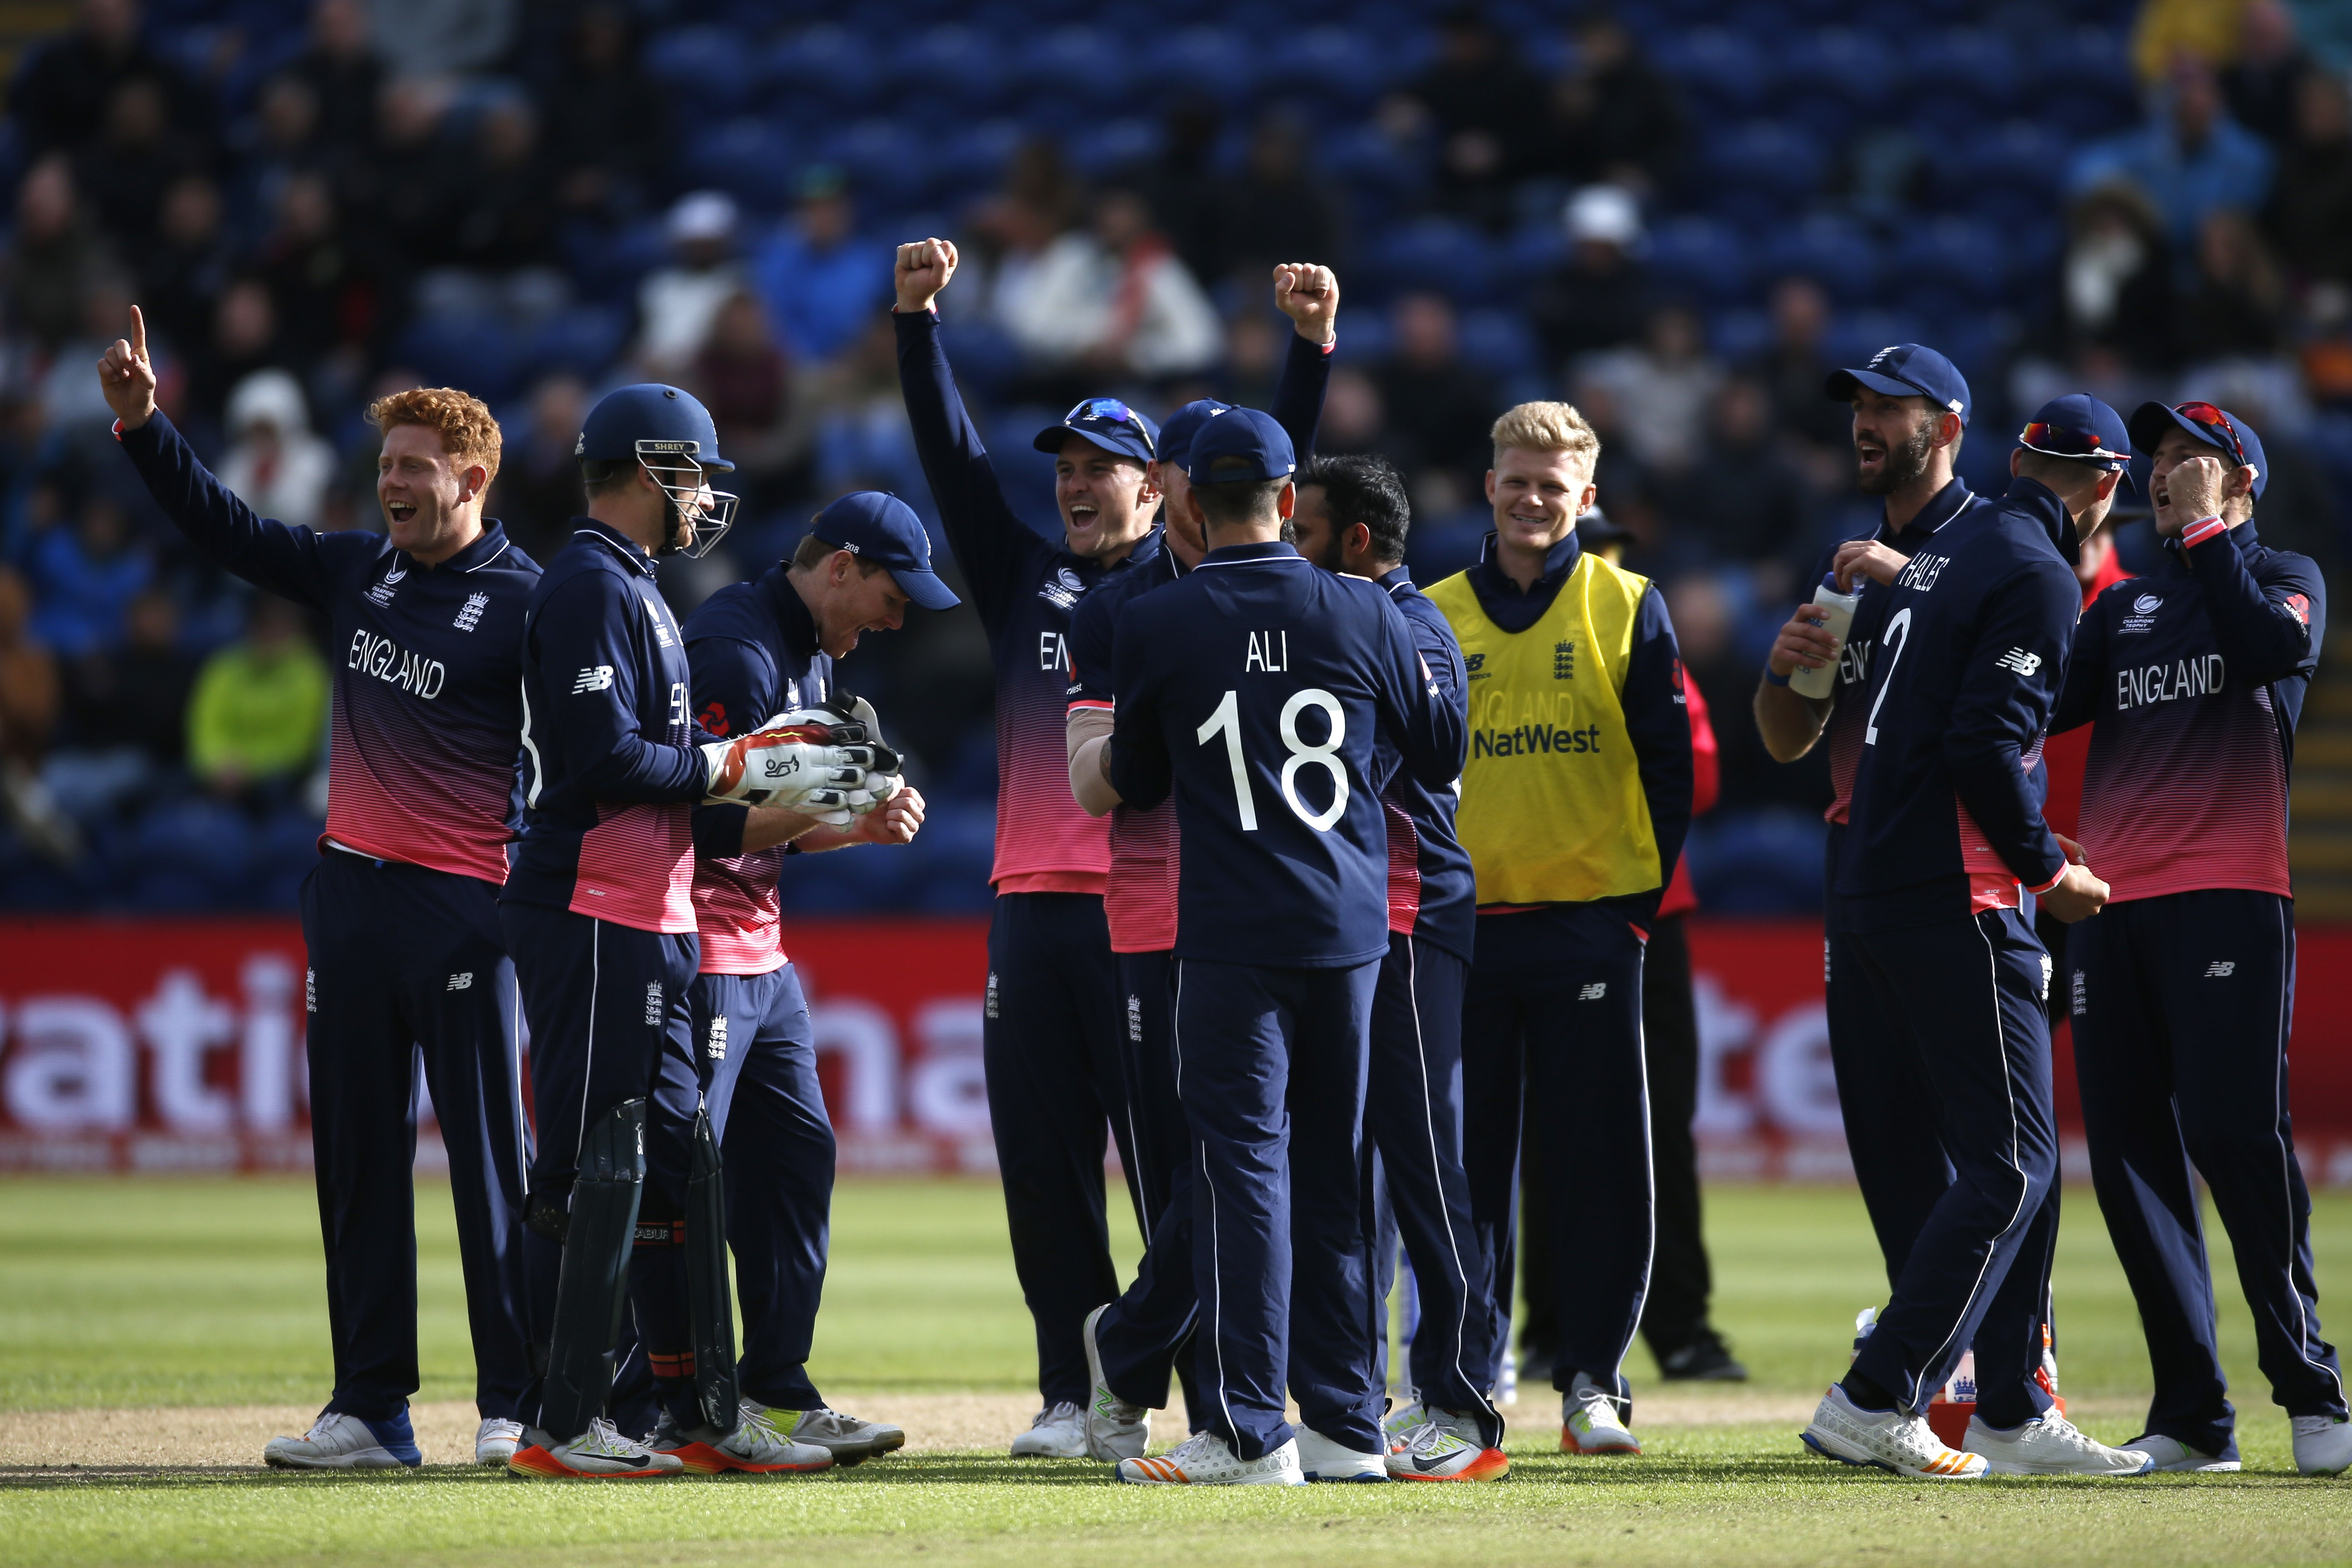 England celebrate the wicket of New Zealand’s Neil Broom during their Champions Trophy victory. Photo: Reuters